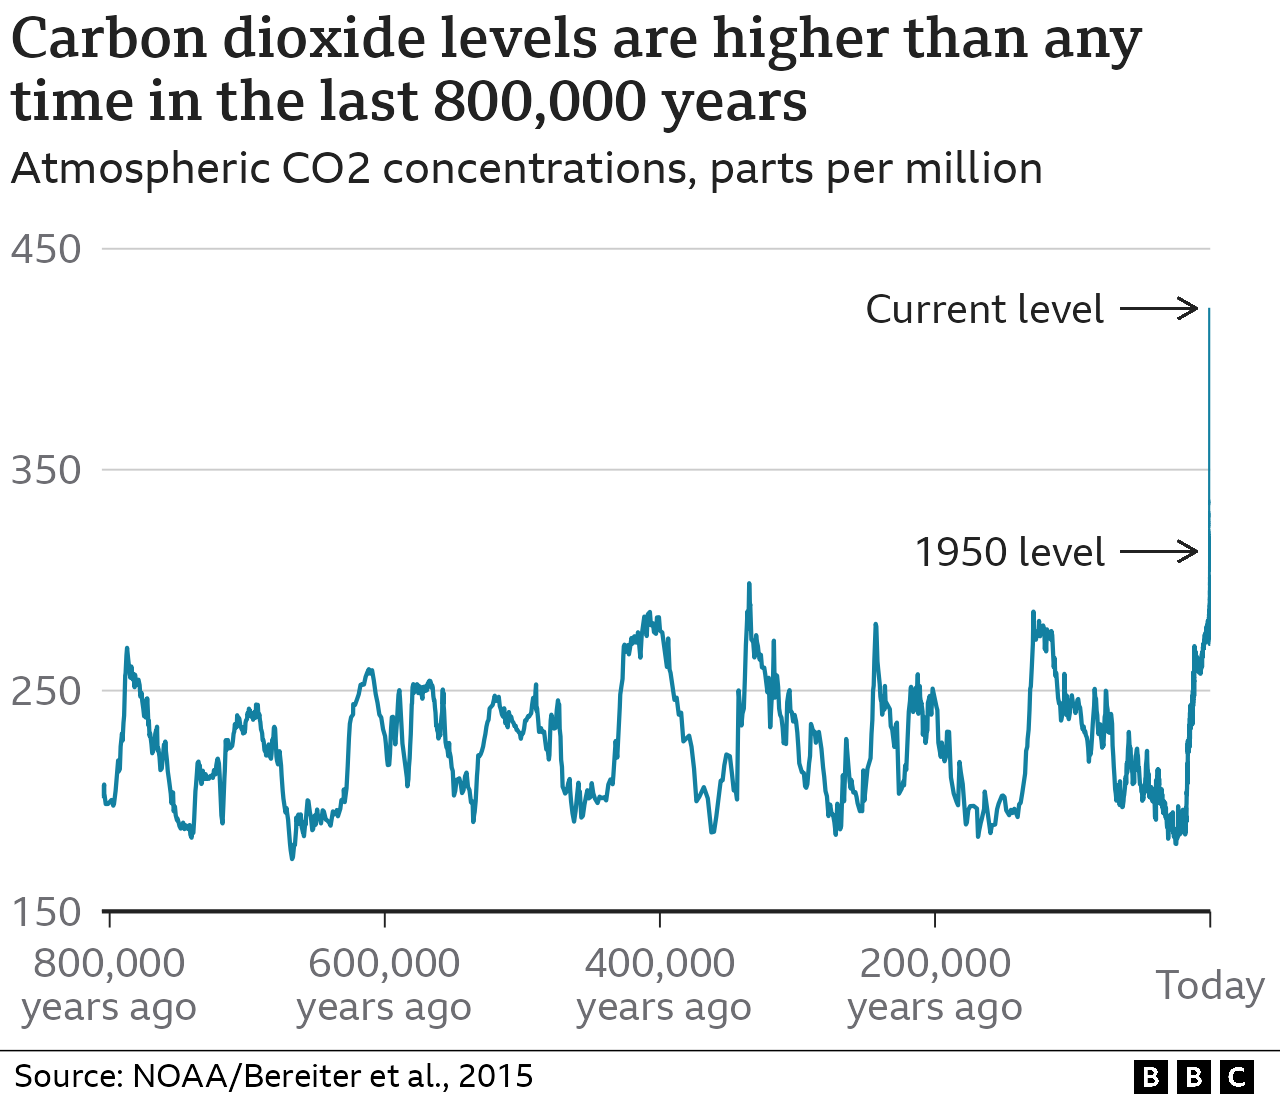 Over the last 800,000 years, CO2 concentrations in the atmosphere have fluctuated between about 180 and 300 parts per million in a sawtooth like pattern. Today, CO2 levels are over 420 parts per million and have risen sharply over the last century - a near vertical line on the graph.